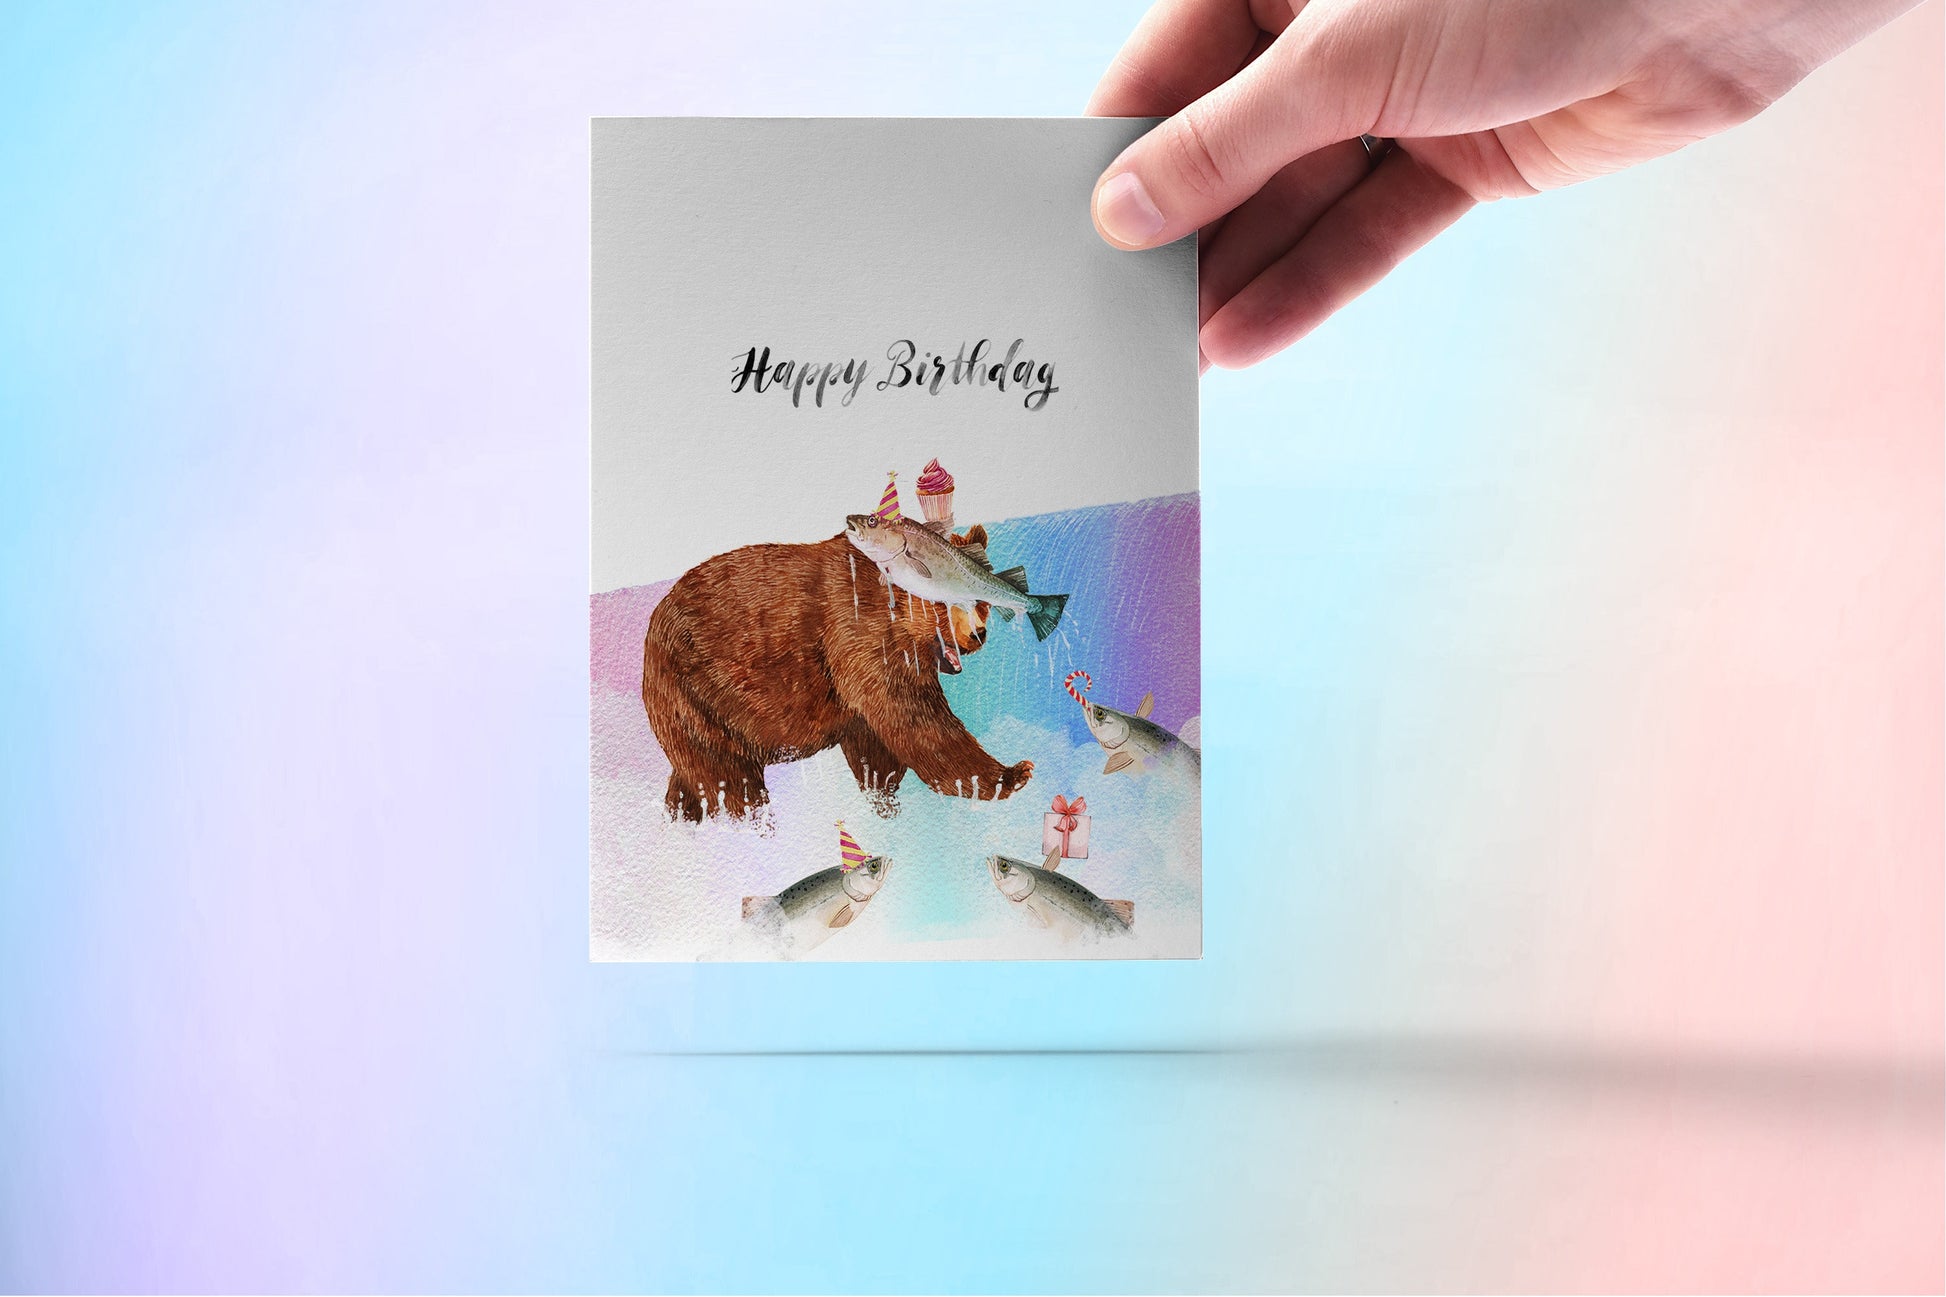 Grizzly Bear Funny Birthday Cards For Boyfriend - Salmon Fish Fly Fishing Birthday Party